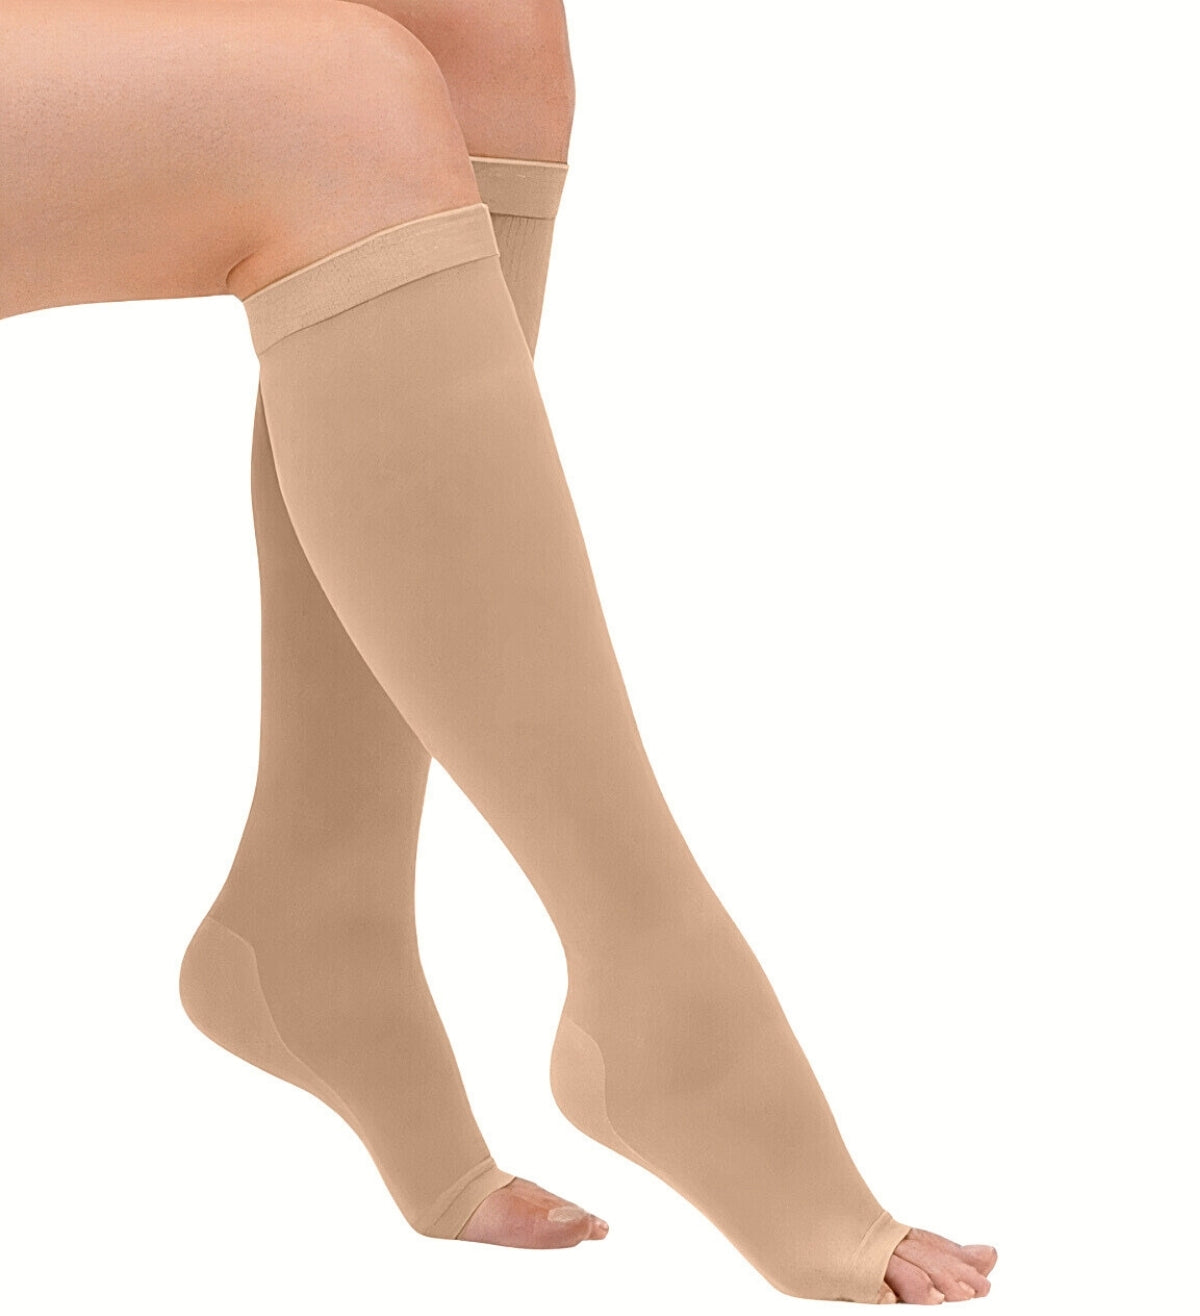 3,243 Compression Socks Royalty-Free Photos and Stock Images